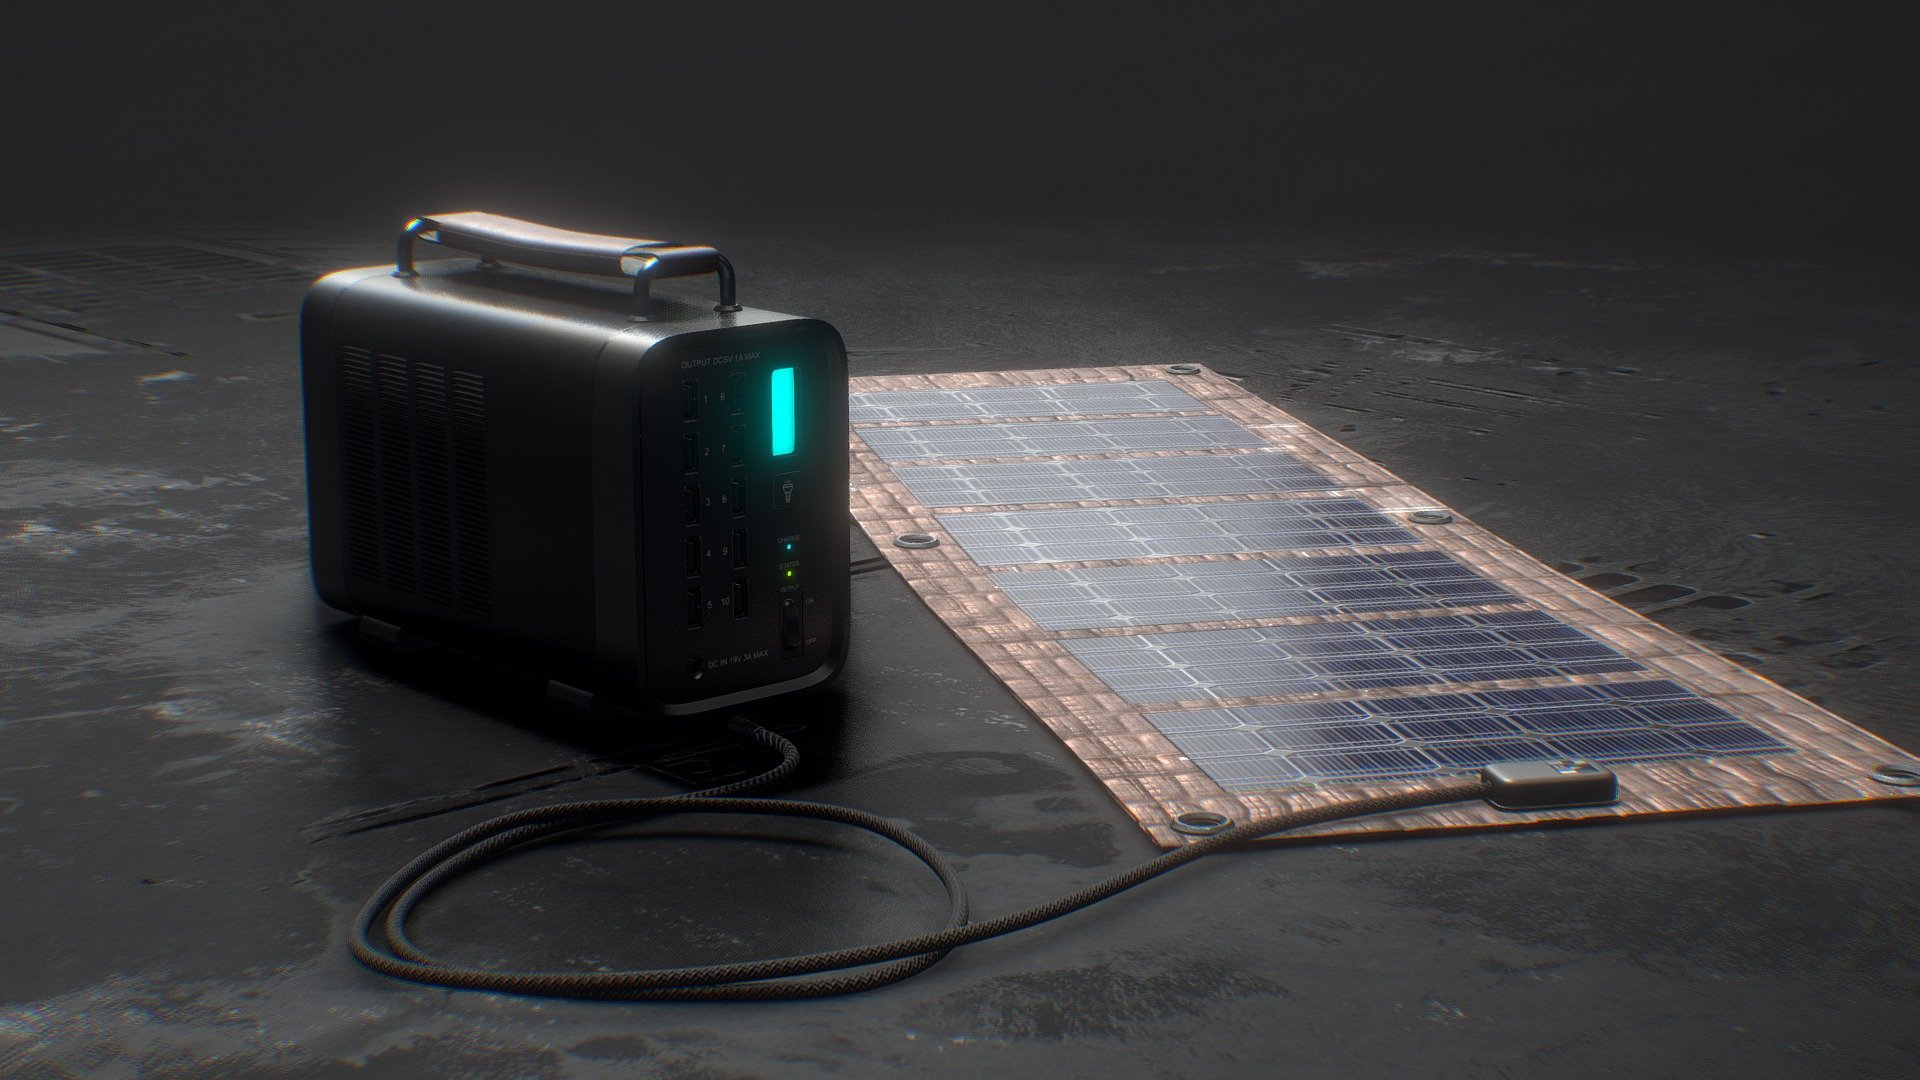 2000 WATT PEAK OUTPUT: 1000W Continuous output and 880Wh capacity, the solar powered generator can handle most outdoor situations.

Drag and drop and you are good to go. 4k textures, separated materials.

Separate texture for each object. .obj, .fbx and *.blend included in the aditional final. Low and high poly version. The files are properly organized and ready for export and re-bake if you want to make a change.Also a light rig is included to show the model. I can also provide the Substance Painter File and bigger textures if needed.

Check my profile for free models https://sketchfab.com/re1monsen If you enjoy my work please consider supporting me I have many affordable models in the shop.

Feel free to contact me. I’d love yo hear from you.

Thanks! - Portable Solar Battery - Buy Royalty Free 3D model by re1monsen 3d model